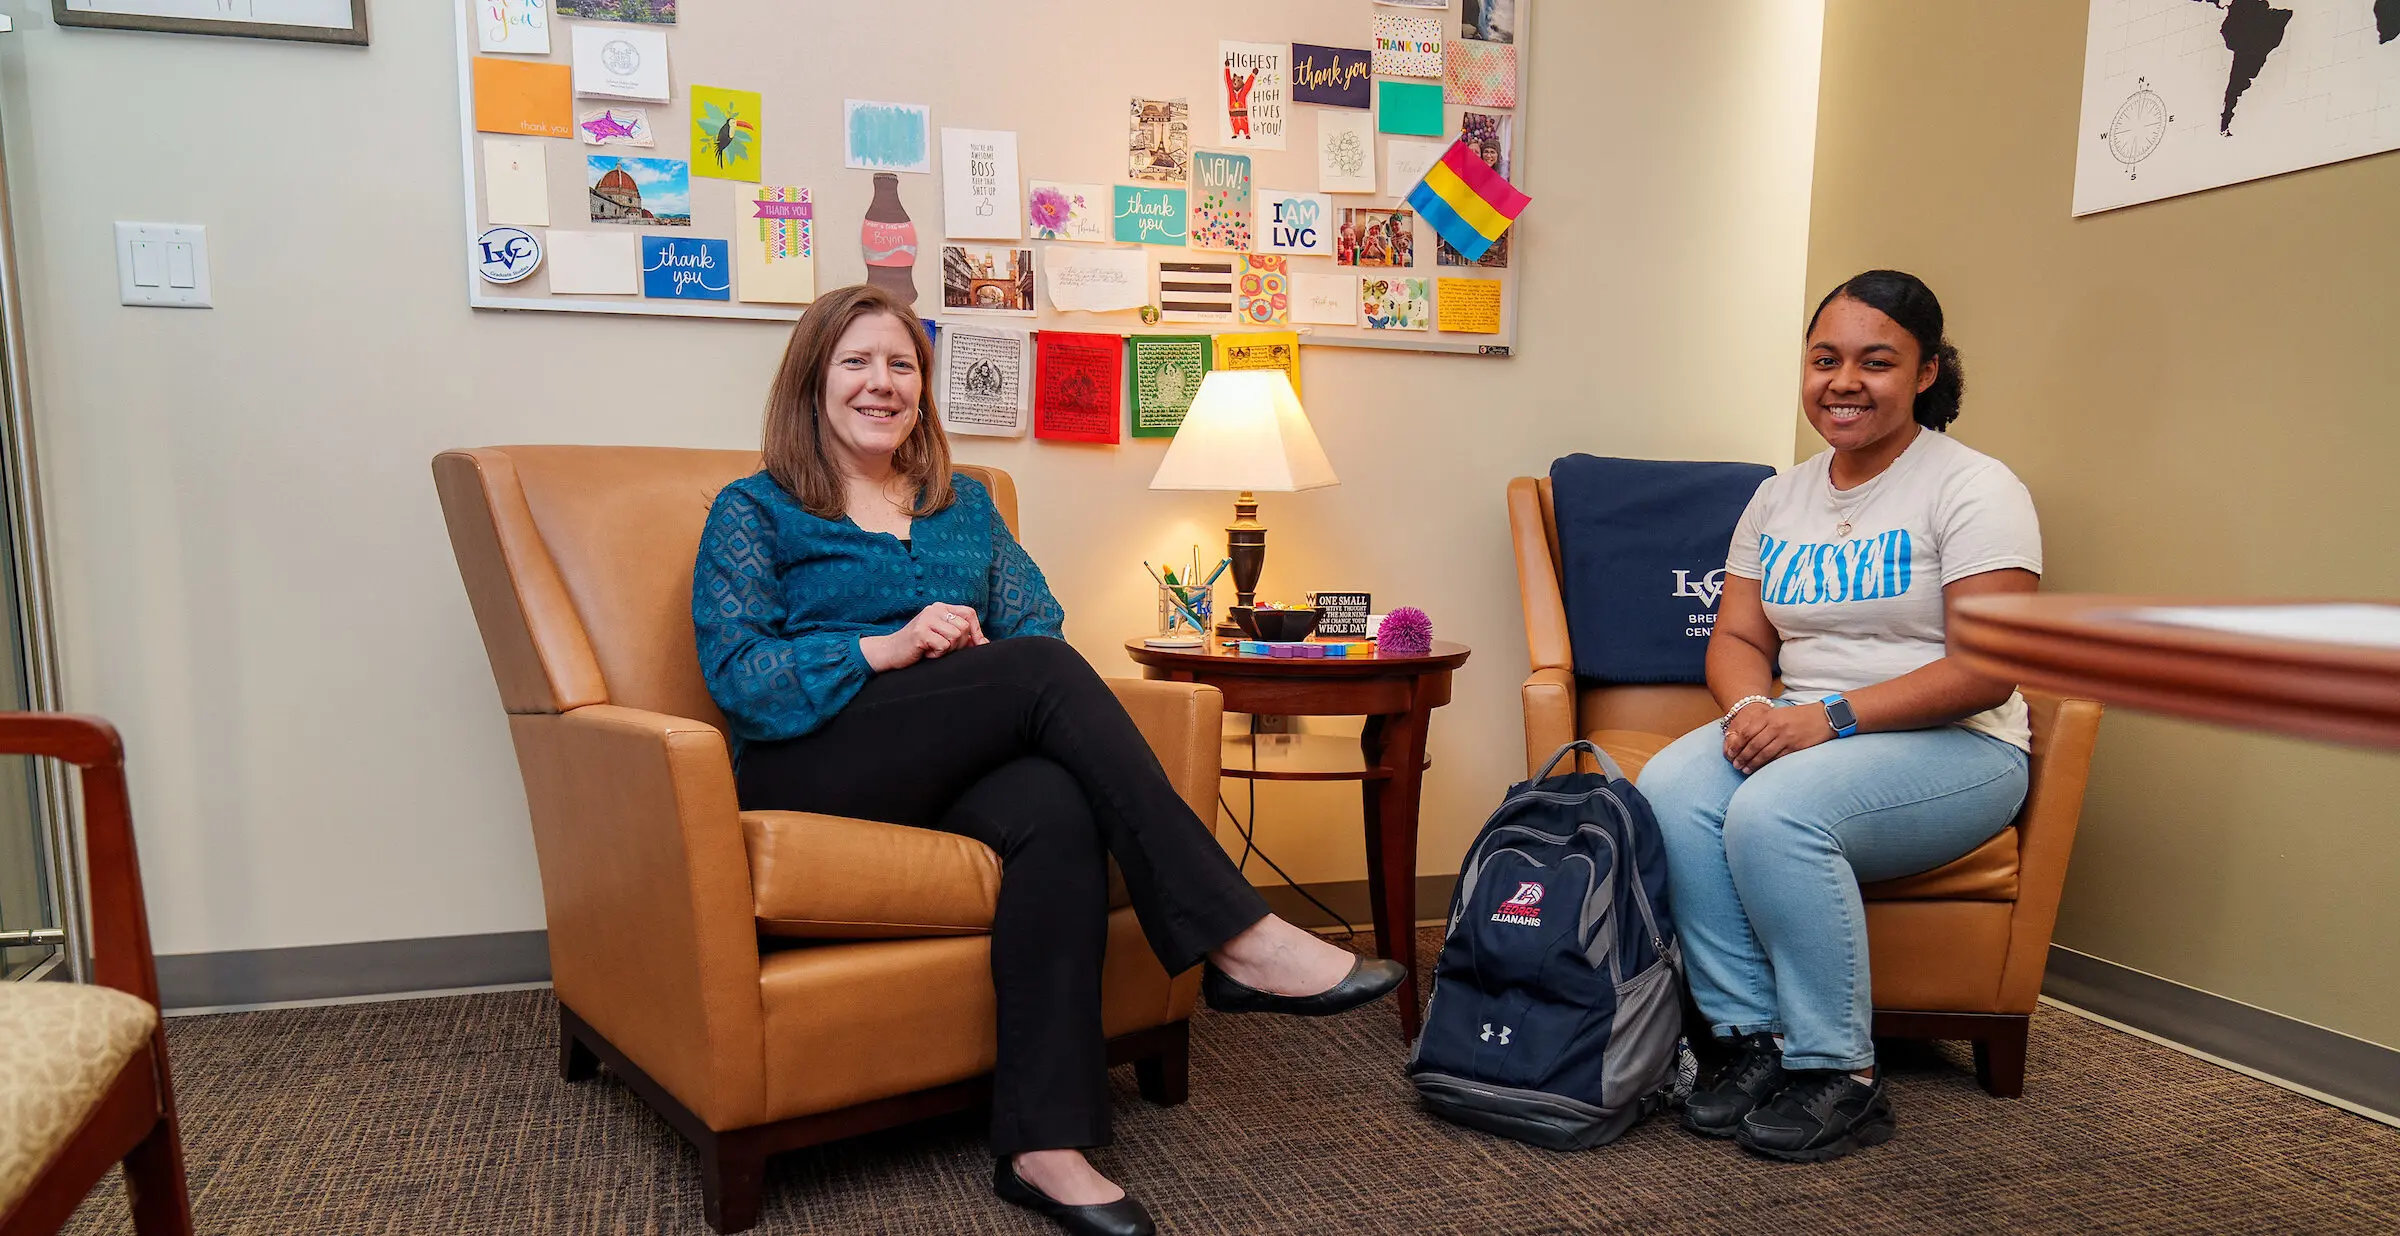 Breen Center director meets with student